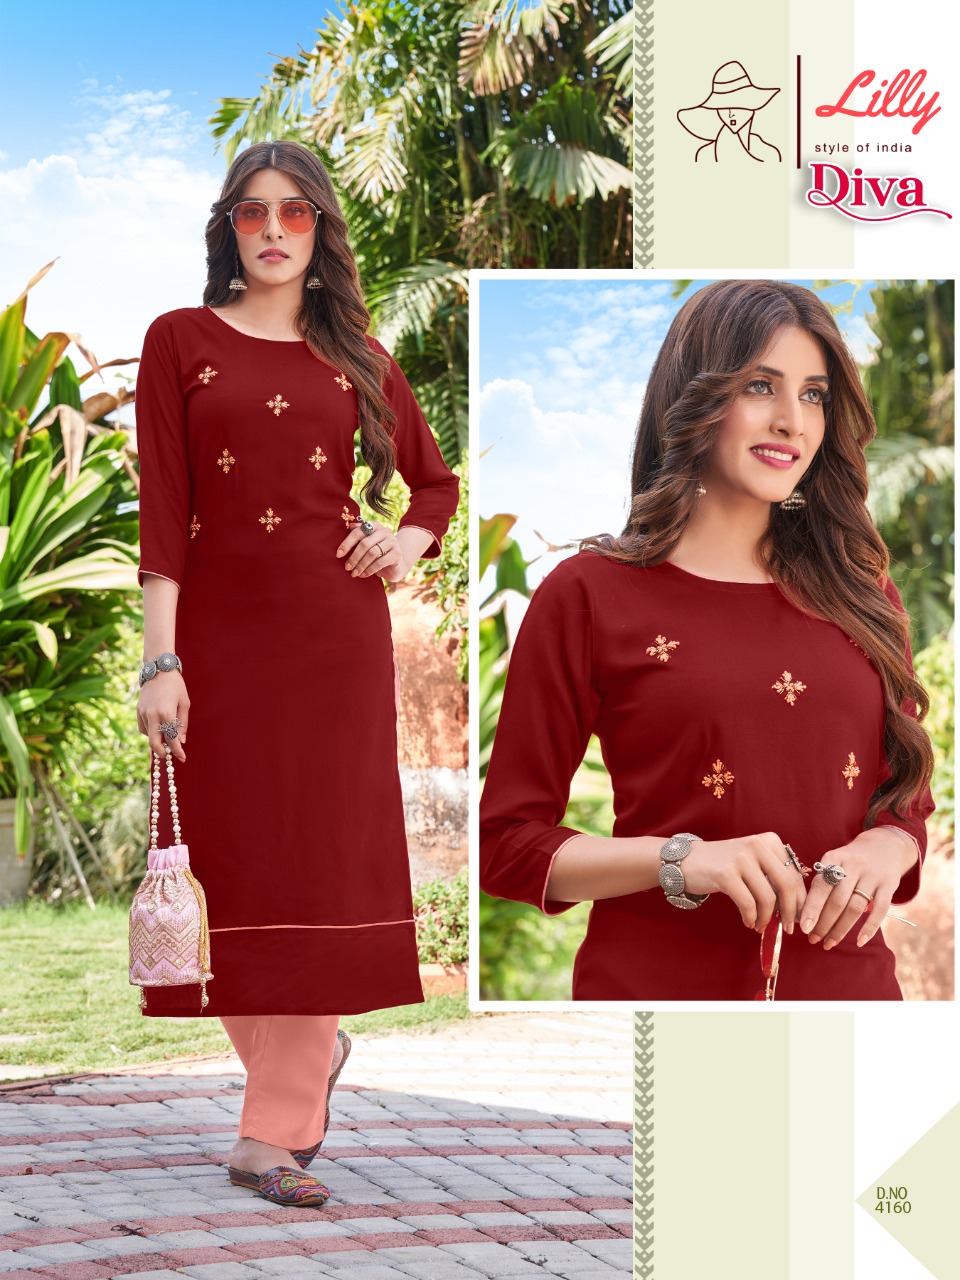 lilly style of india diva rayon regal look kurti catalog